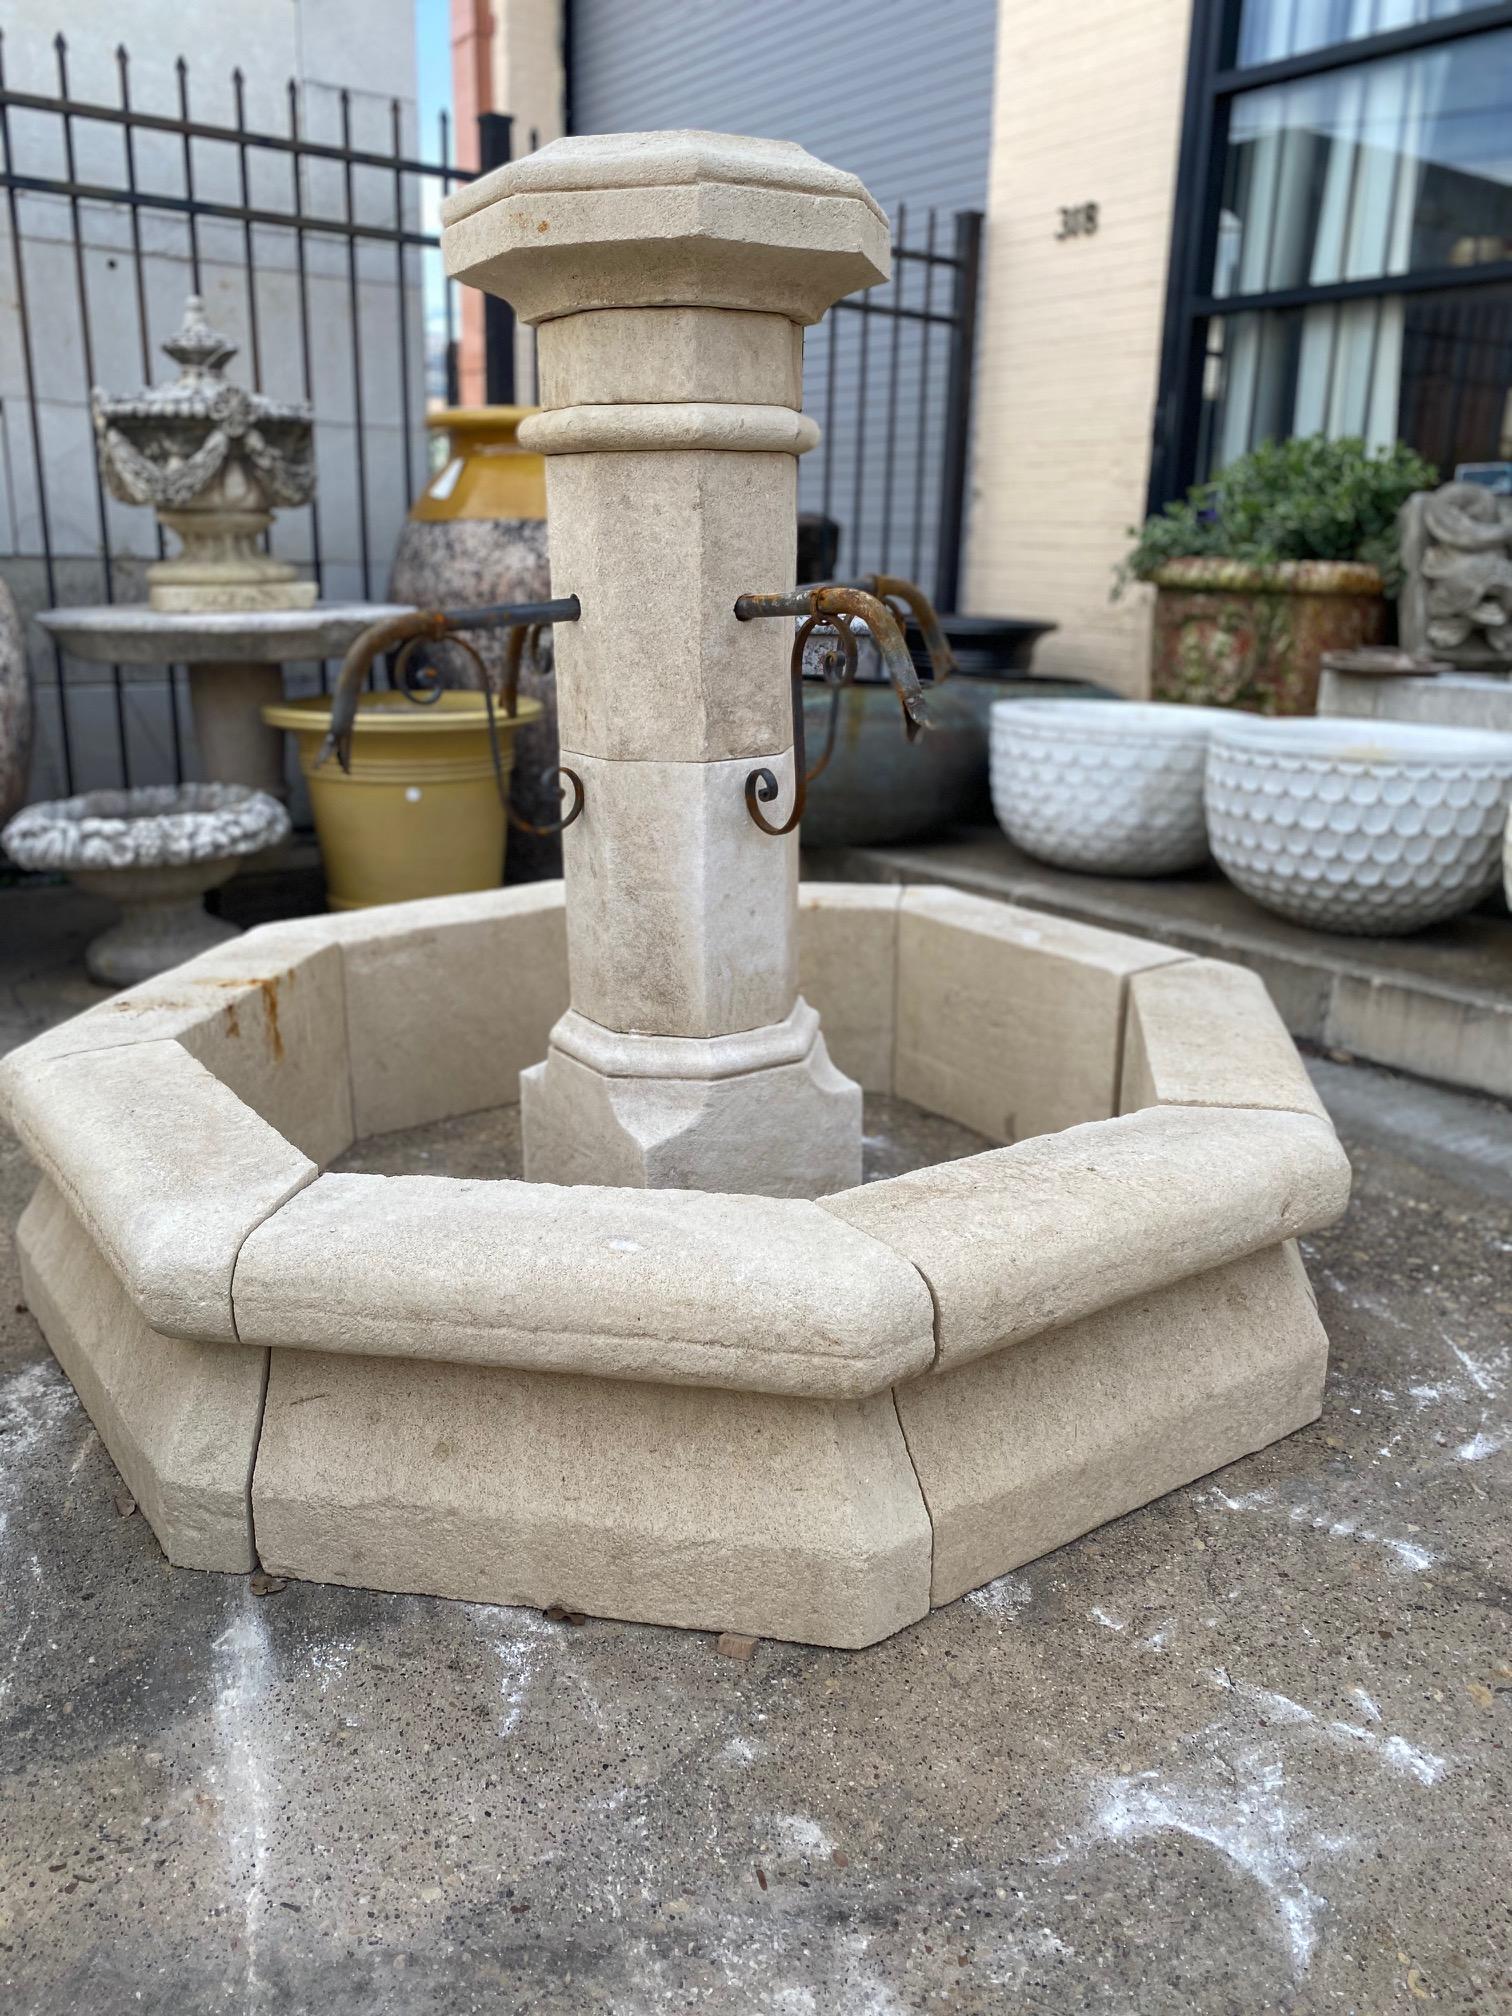 Here we offer a hand carved limestone central fountain with four iron down spouts. This piece stands tall and can be admired from a distance as part of the landscape design or be the focal point of your courtyard or garden as it fills the air with